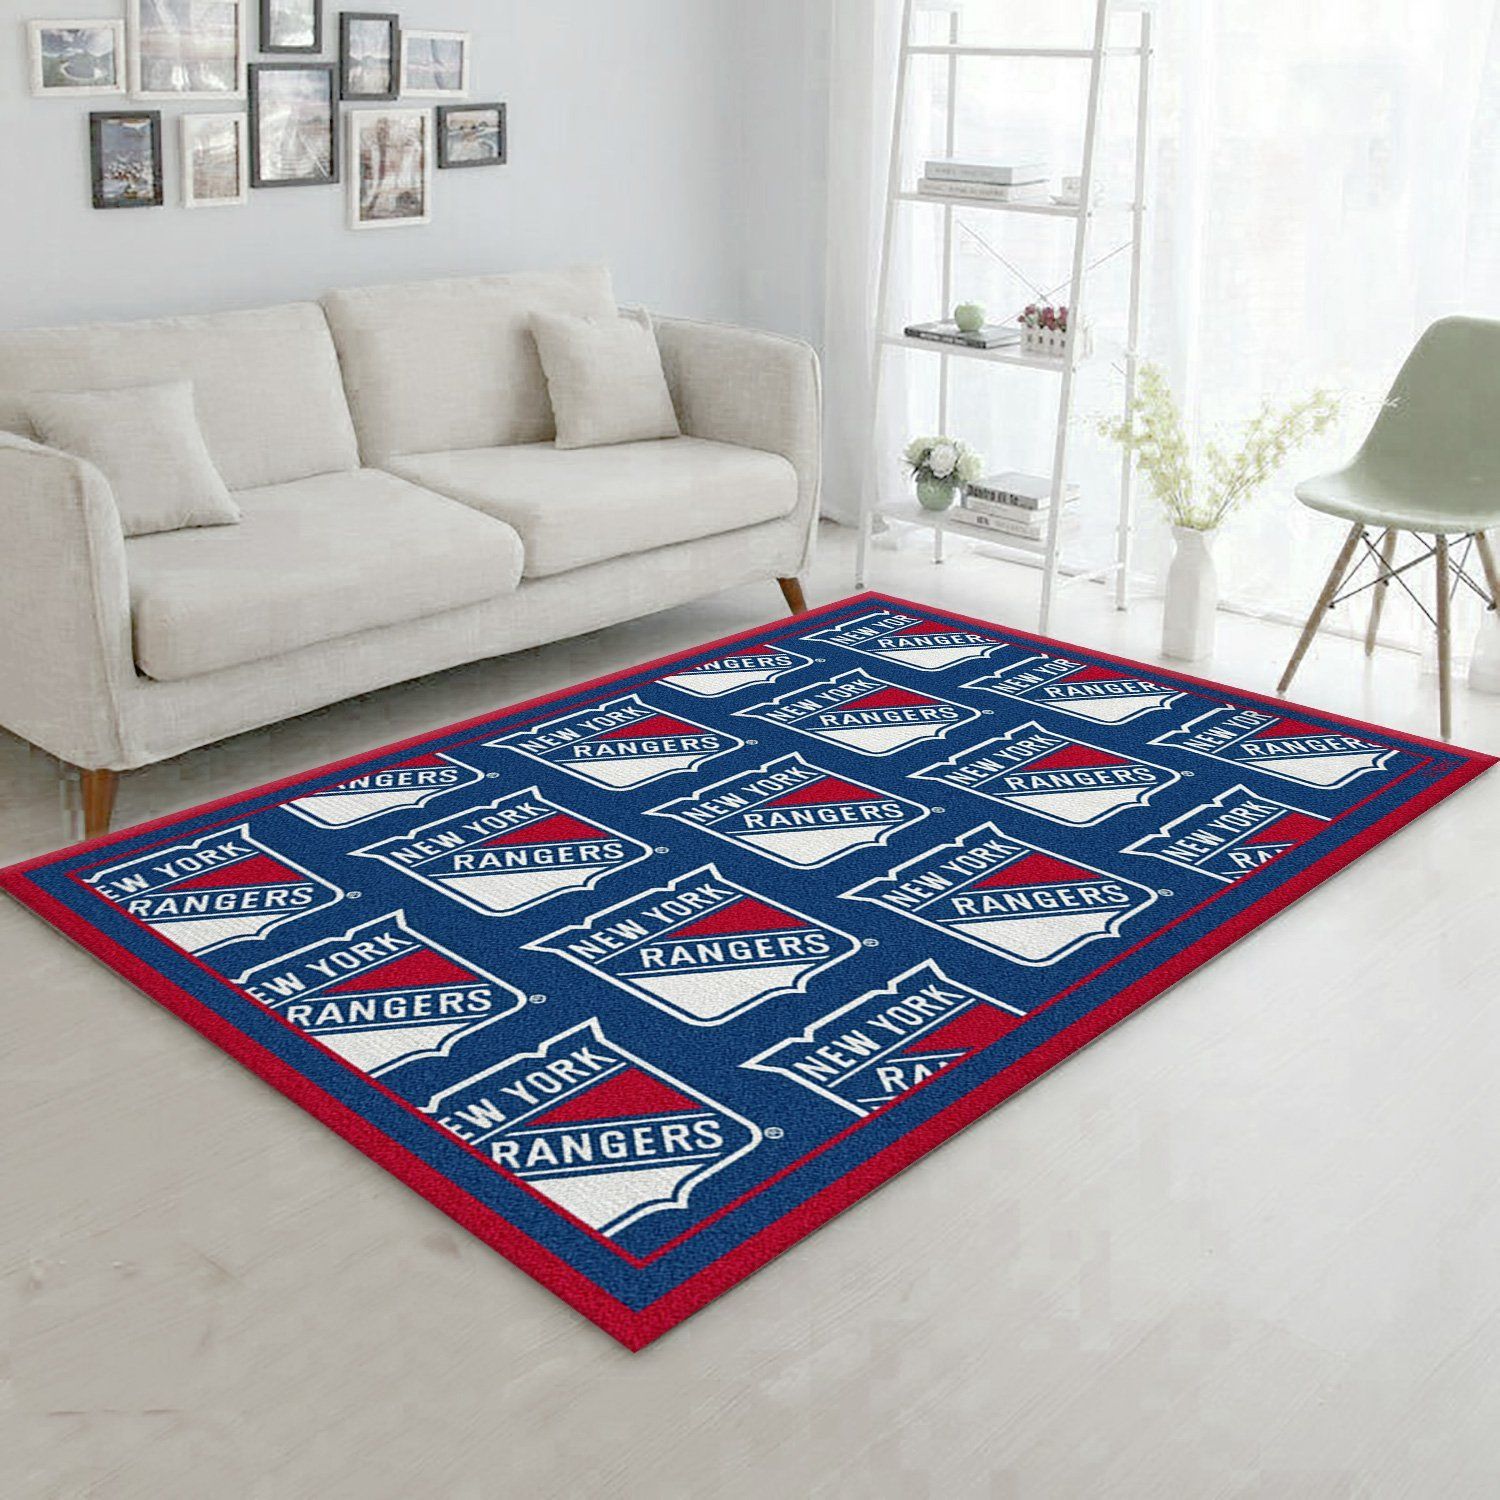 Nhl Repeat New York Rangers Area Rug, Living Room Rug, Home US Decor - Indoor Outdoor Rugs 2